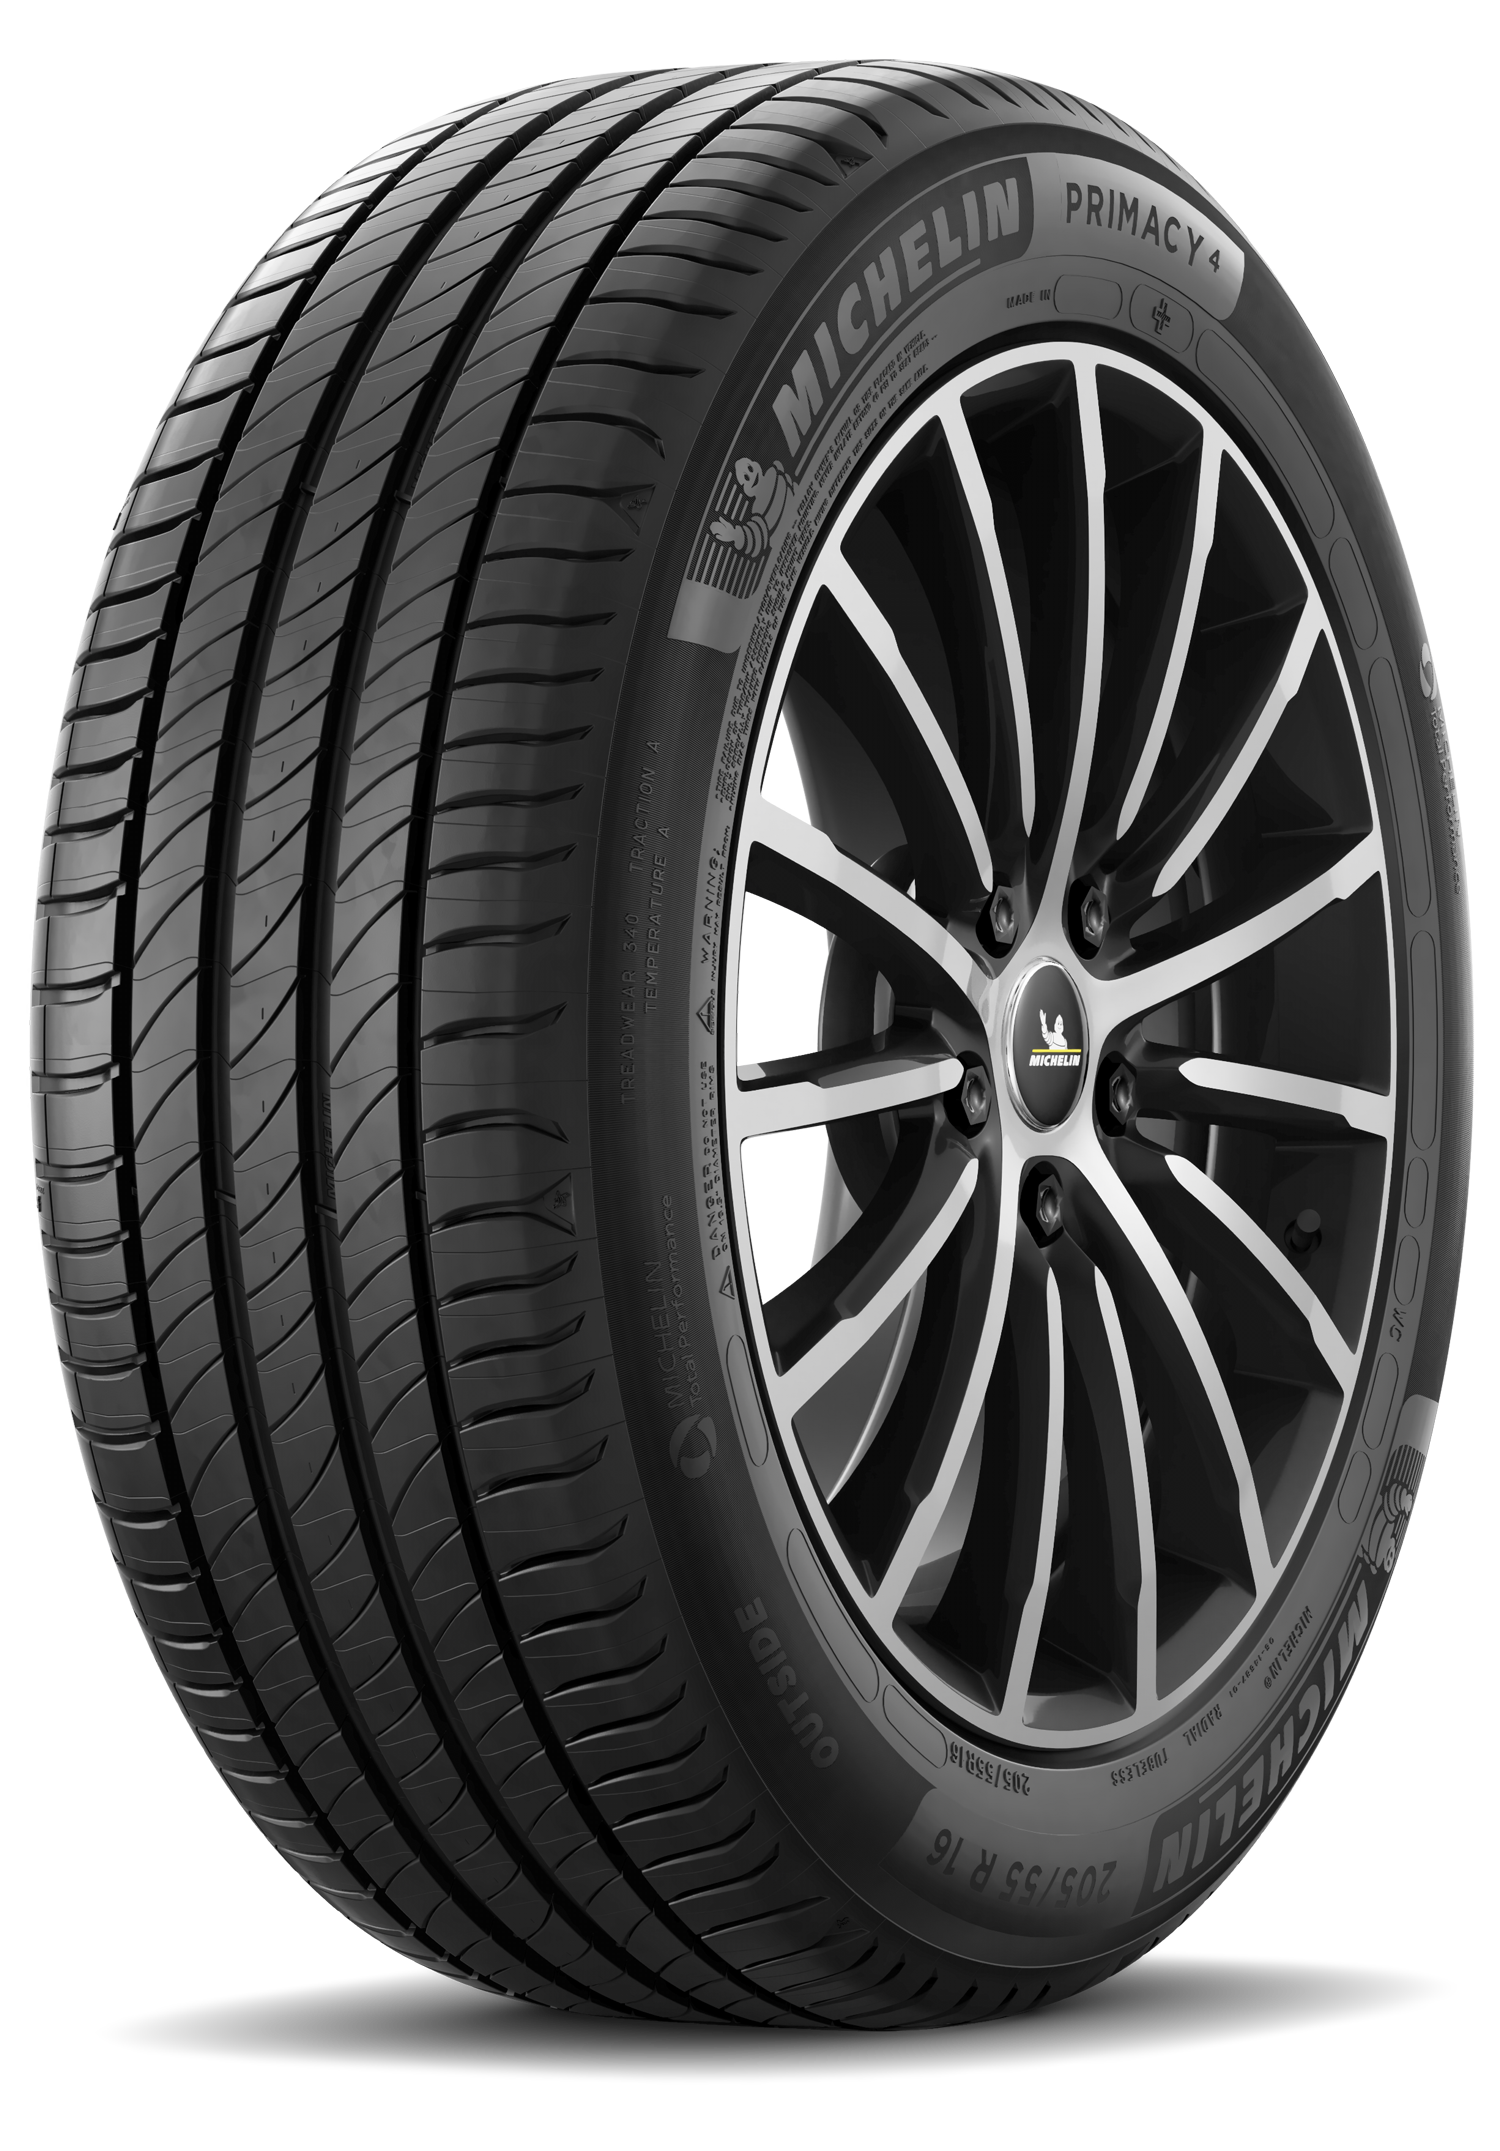 Michelin Primacy 4 Tyre - and Tests Reviews Plus